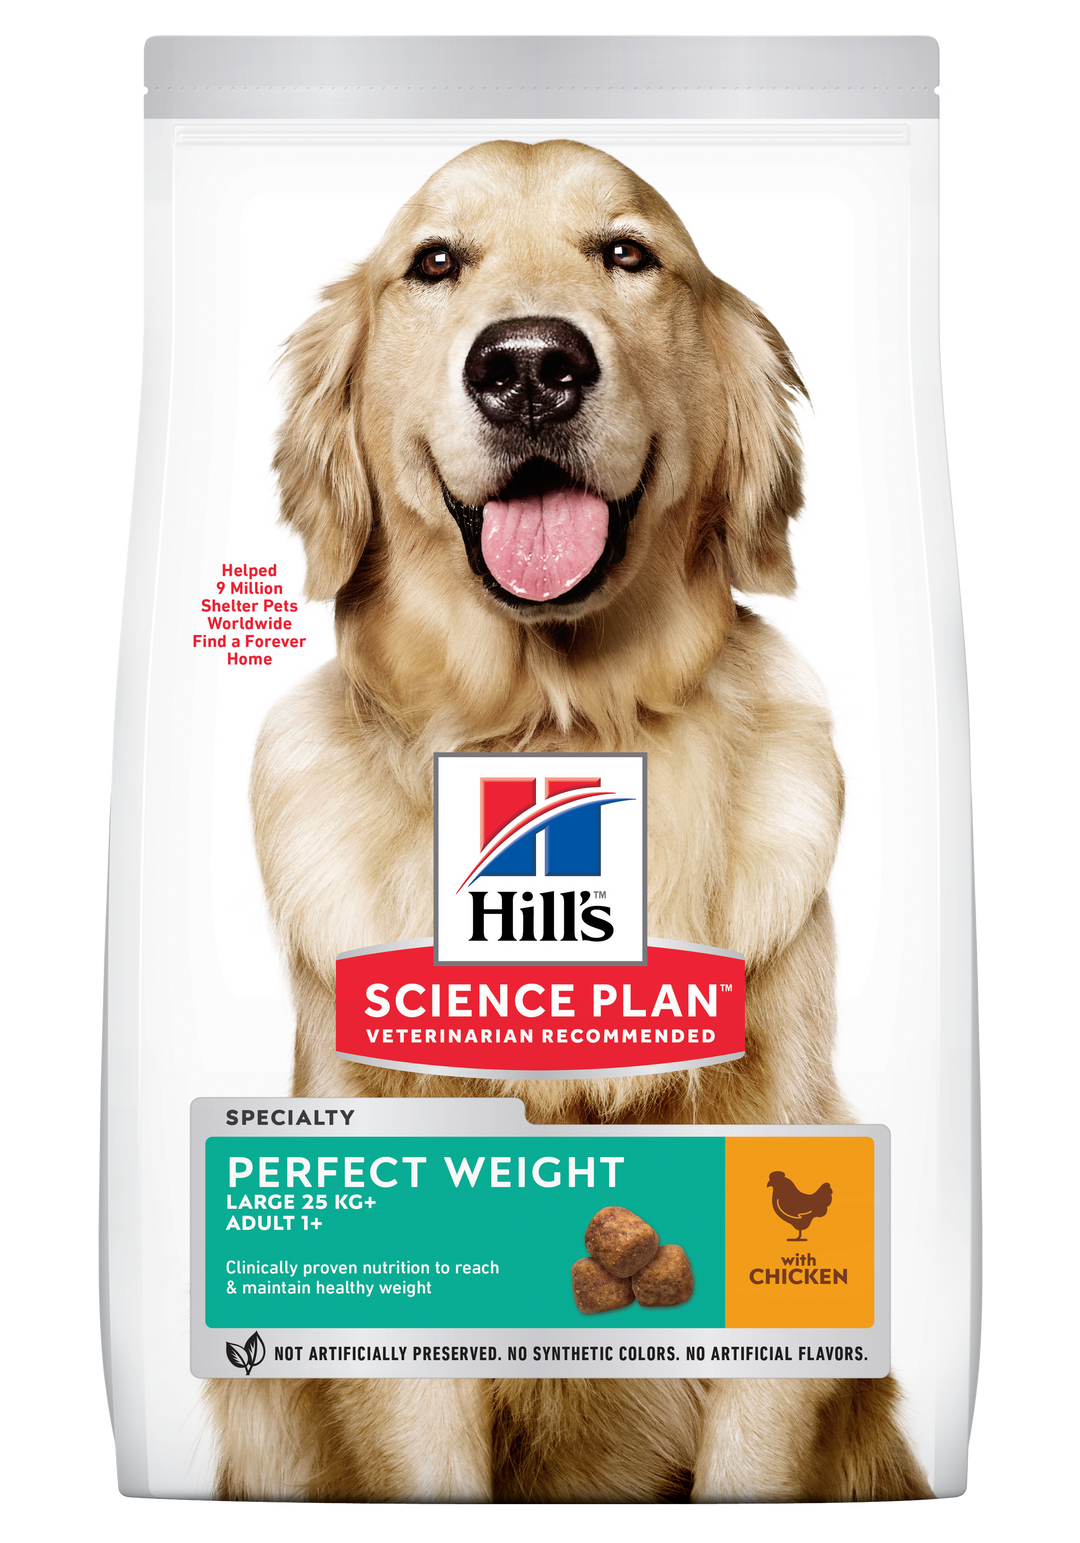 Hill's Science Plan Adult 1-6 Perfect Weight Large Breed Dog Food with Chicken